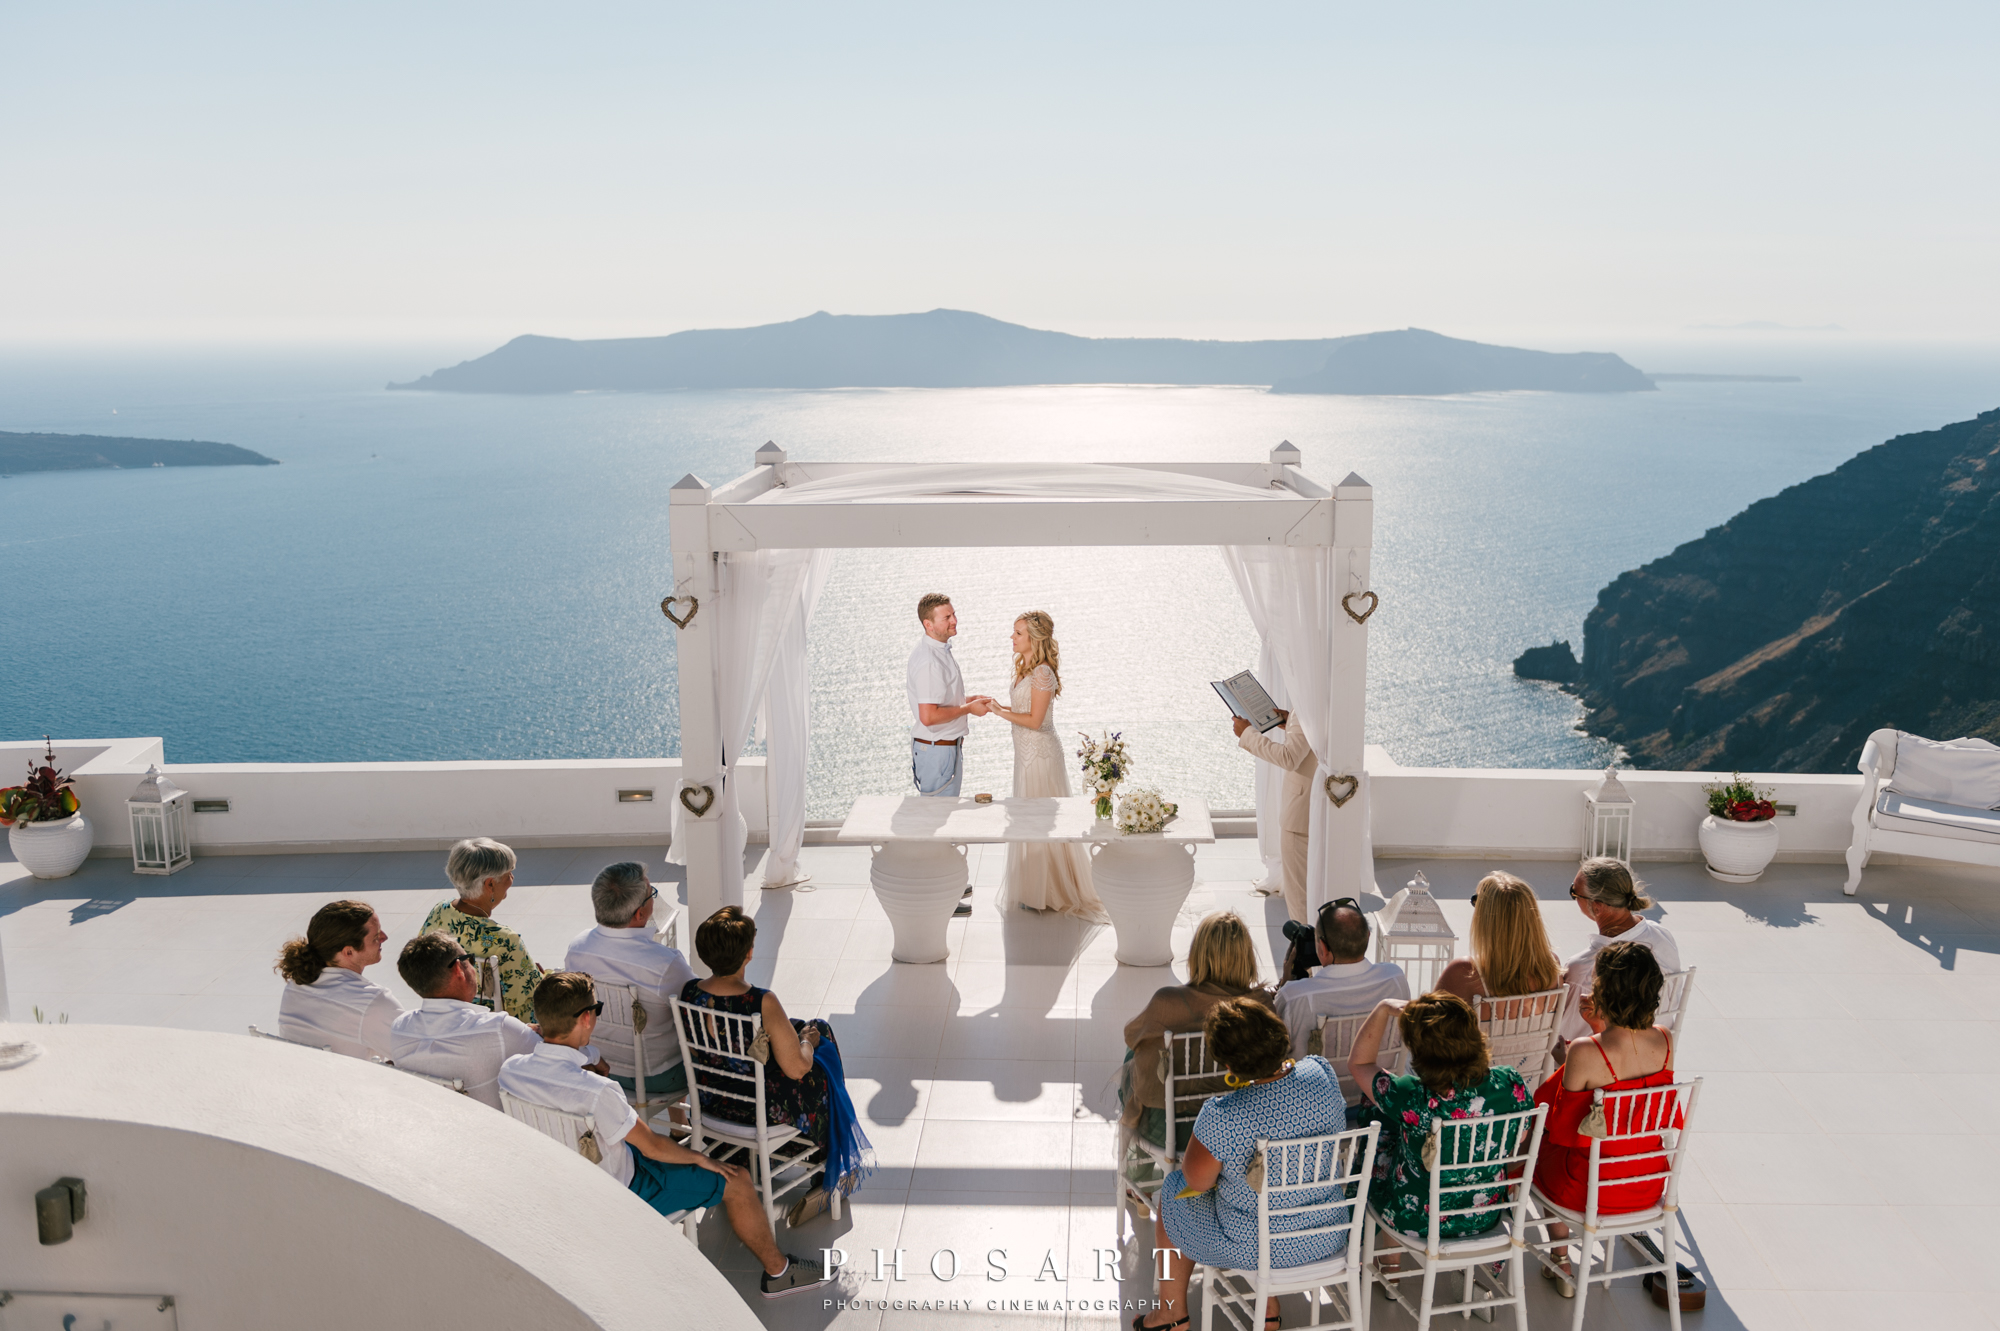 Wedding on the specially designed terrace of Dana Villas overlooking the Aegean Sea and the caldera